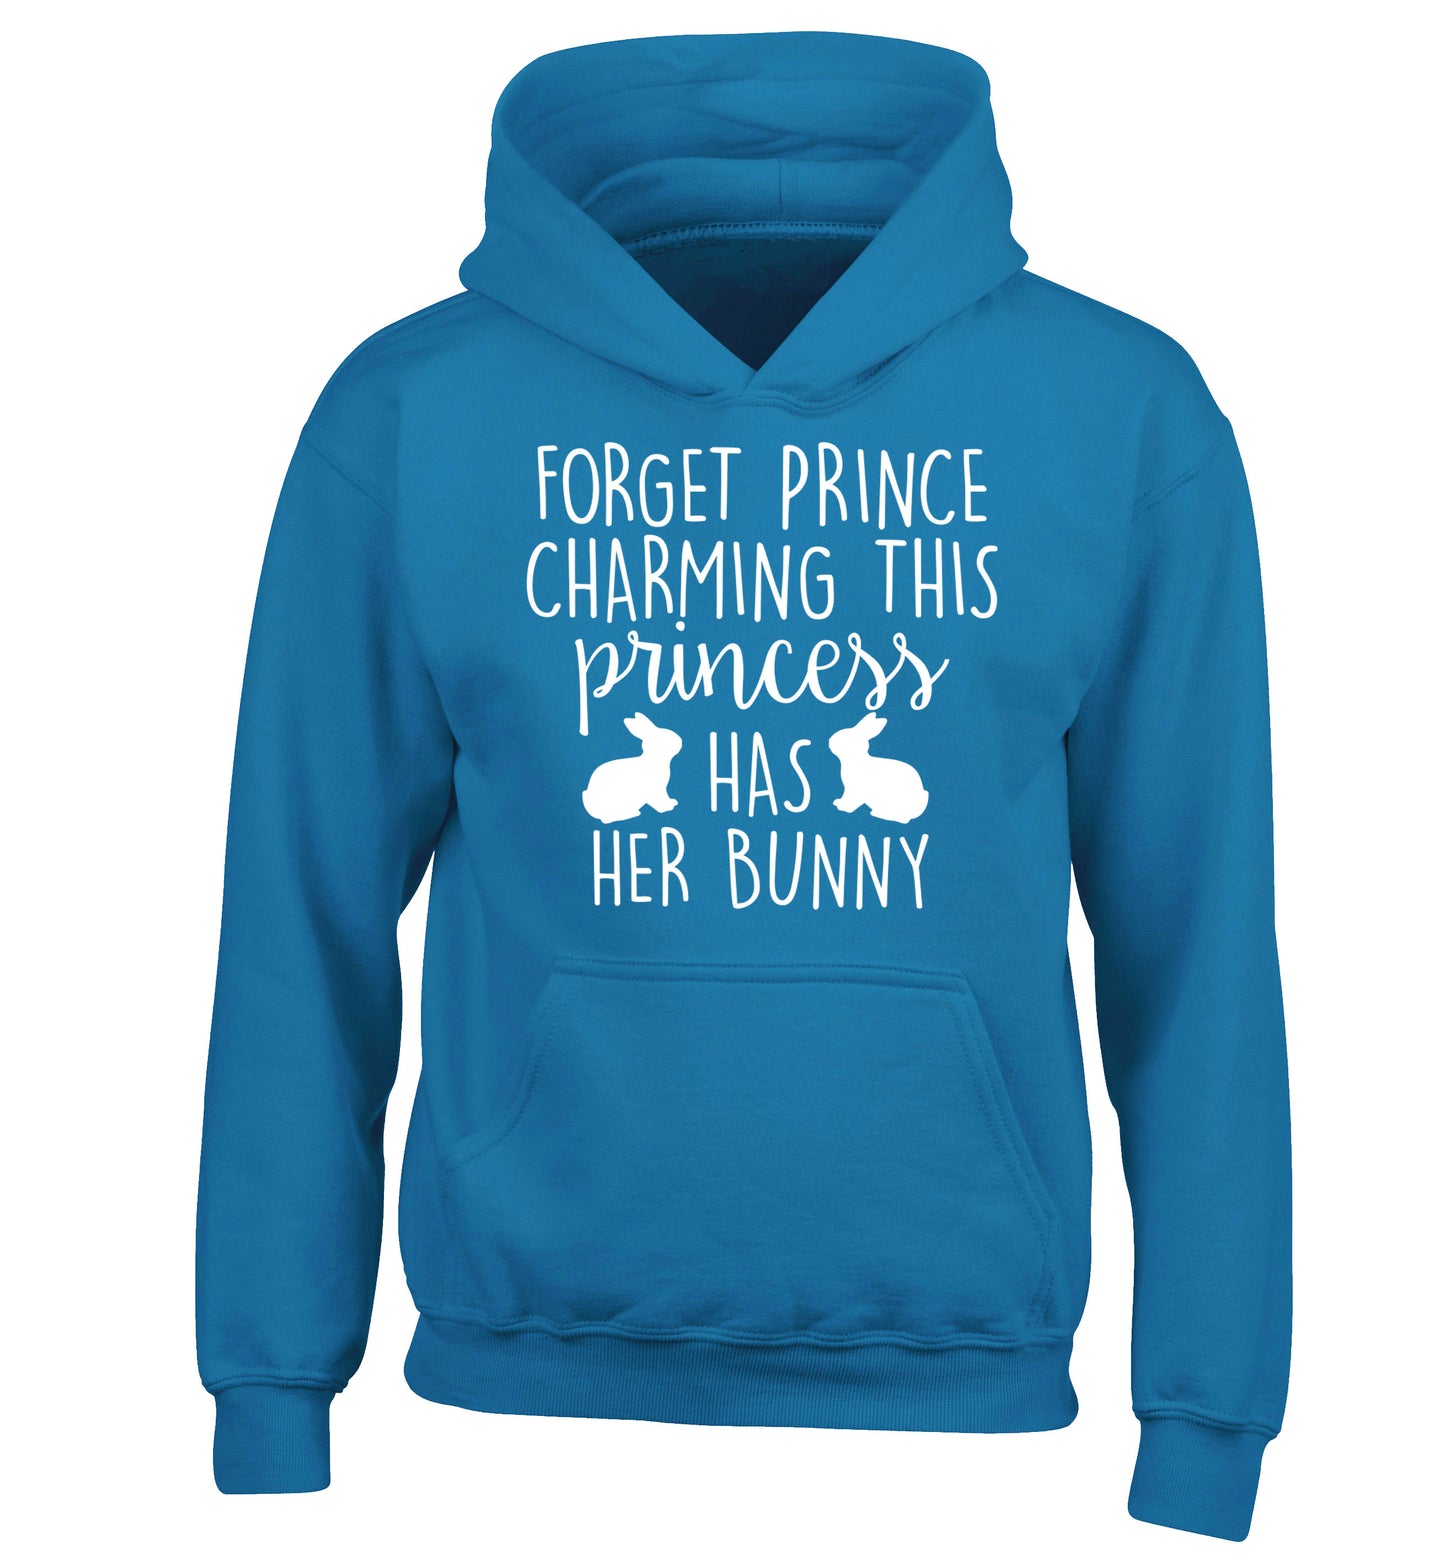 Forget prince charming this princess has her bunny children's blue hoodie 12-14 Years